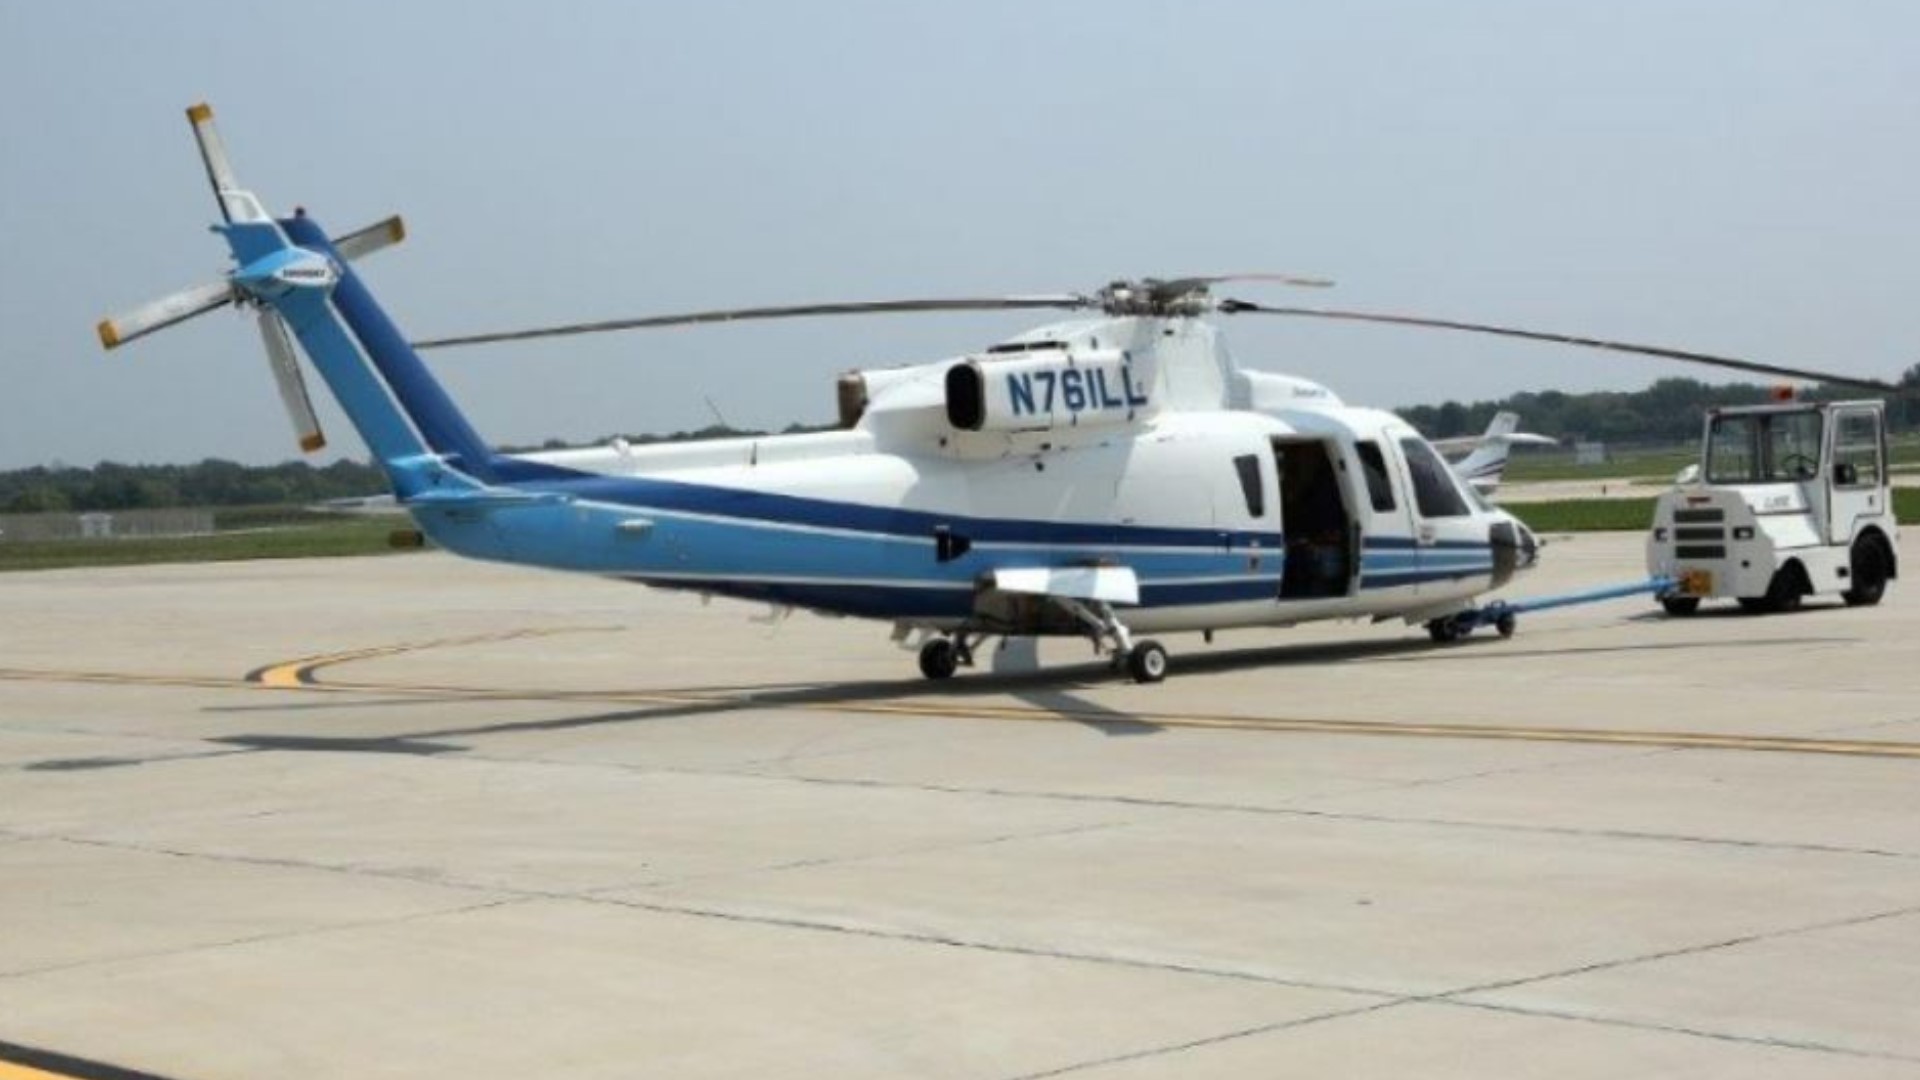 Online records show the helicopter was used by the State of Illinois from 2007 until it was sold in 2015